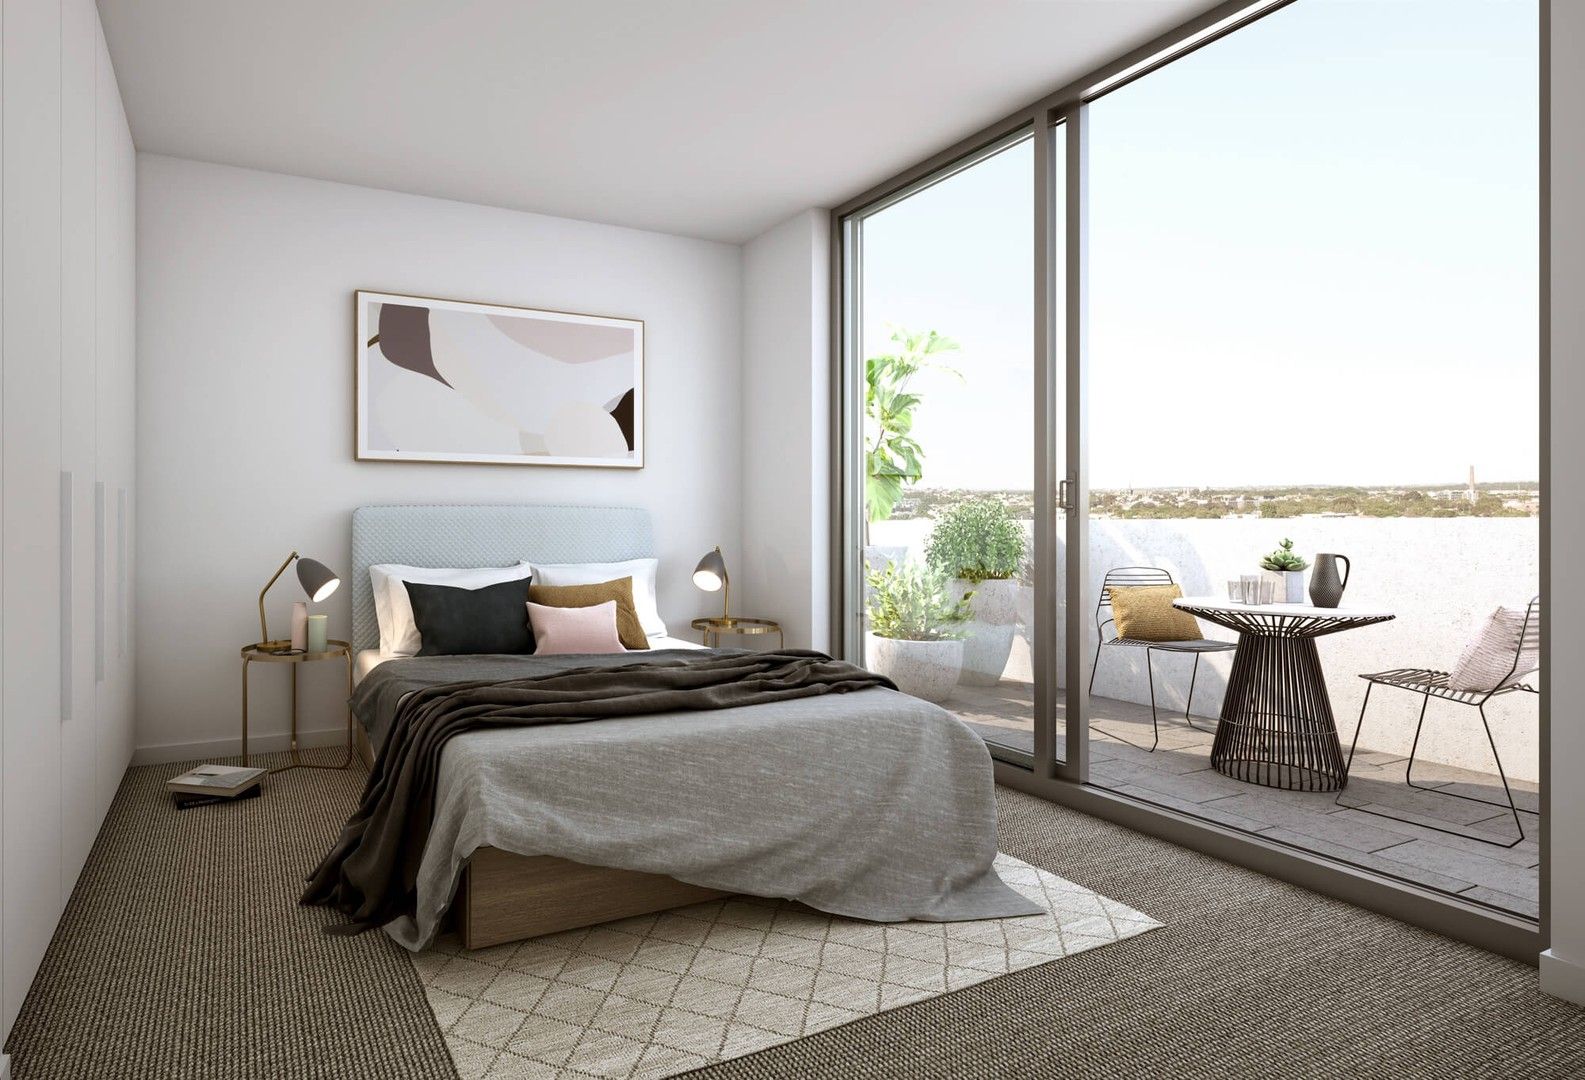 2 bedrooms New Apartments / Off the Plan in  CARLTON VIC, 3053